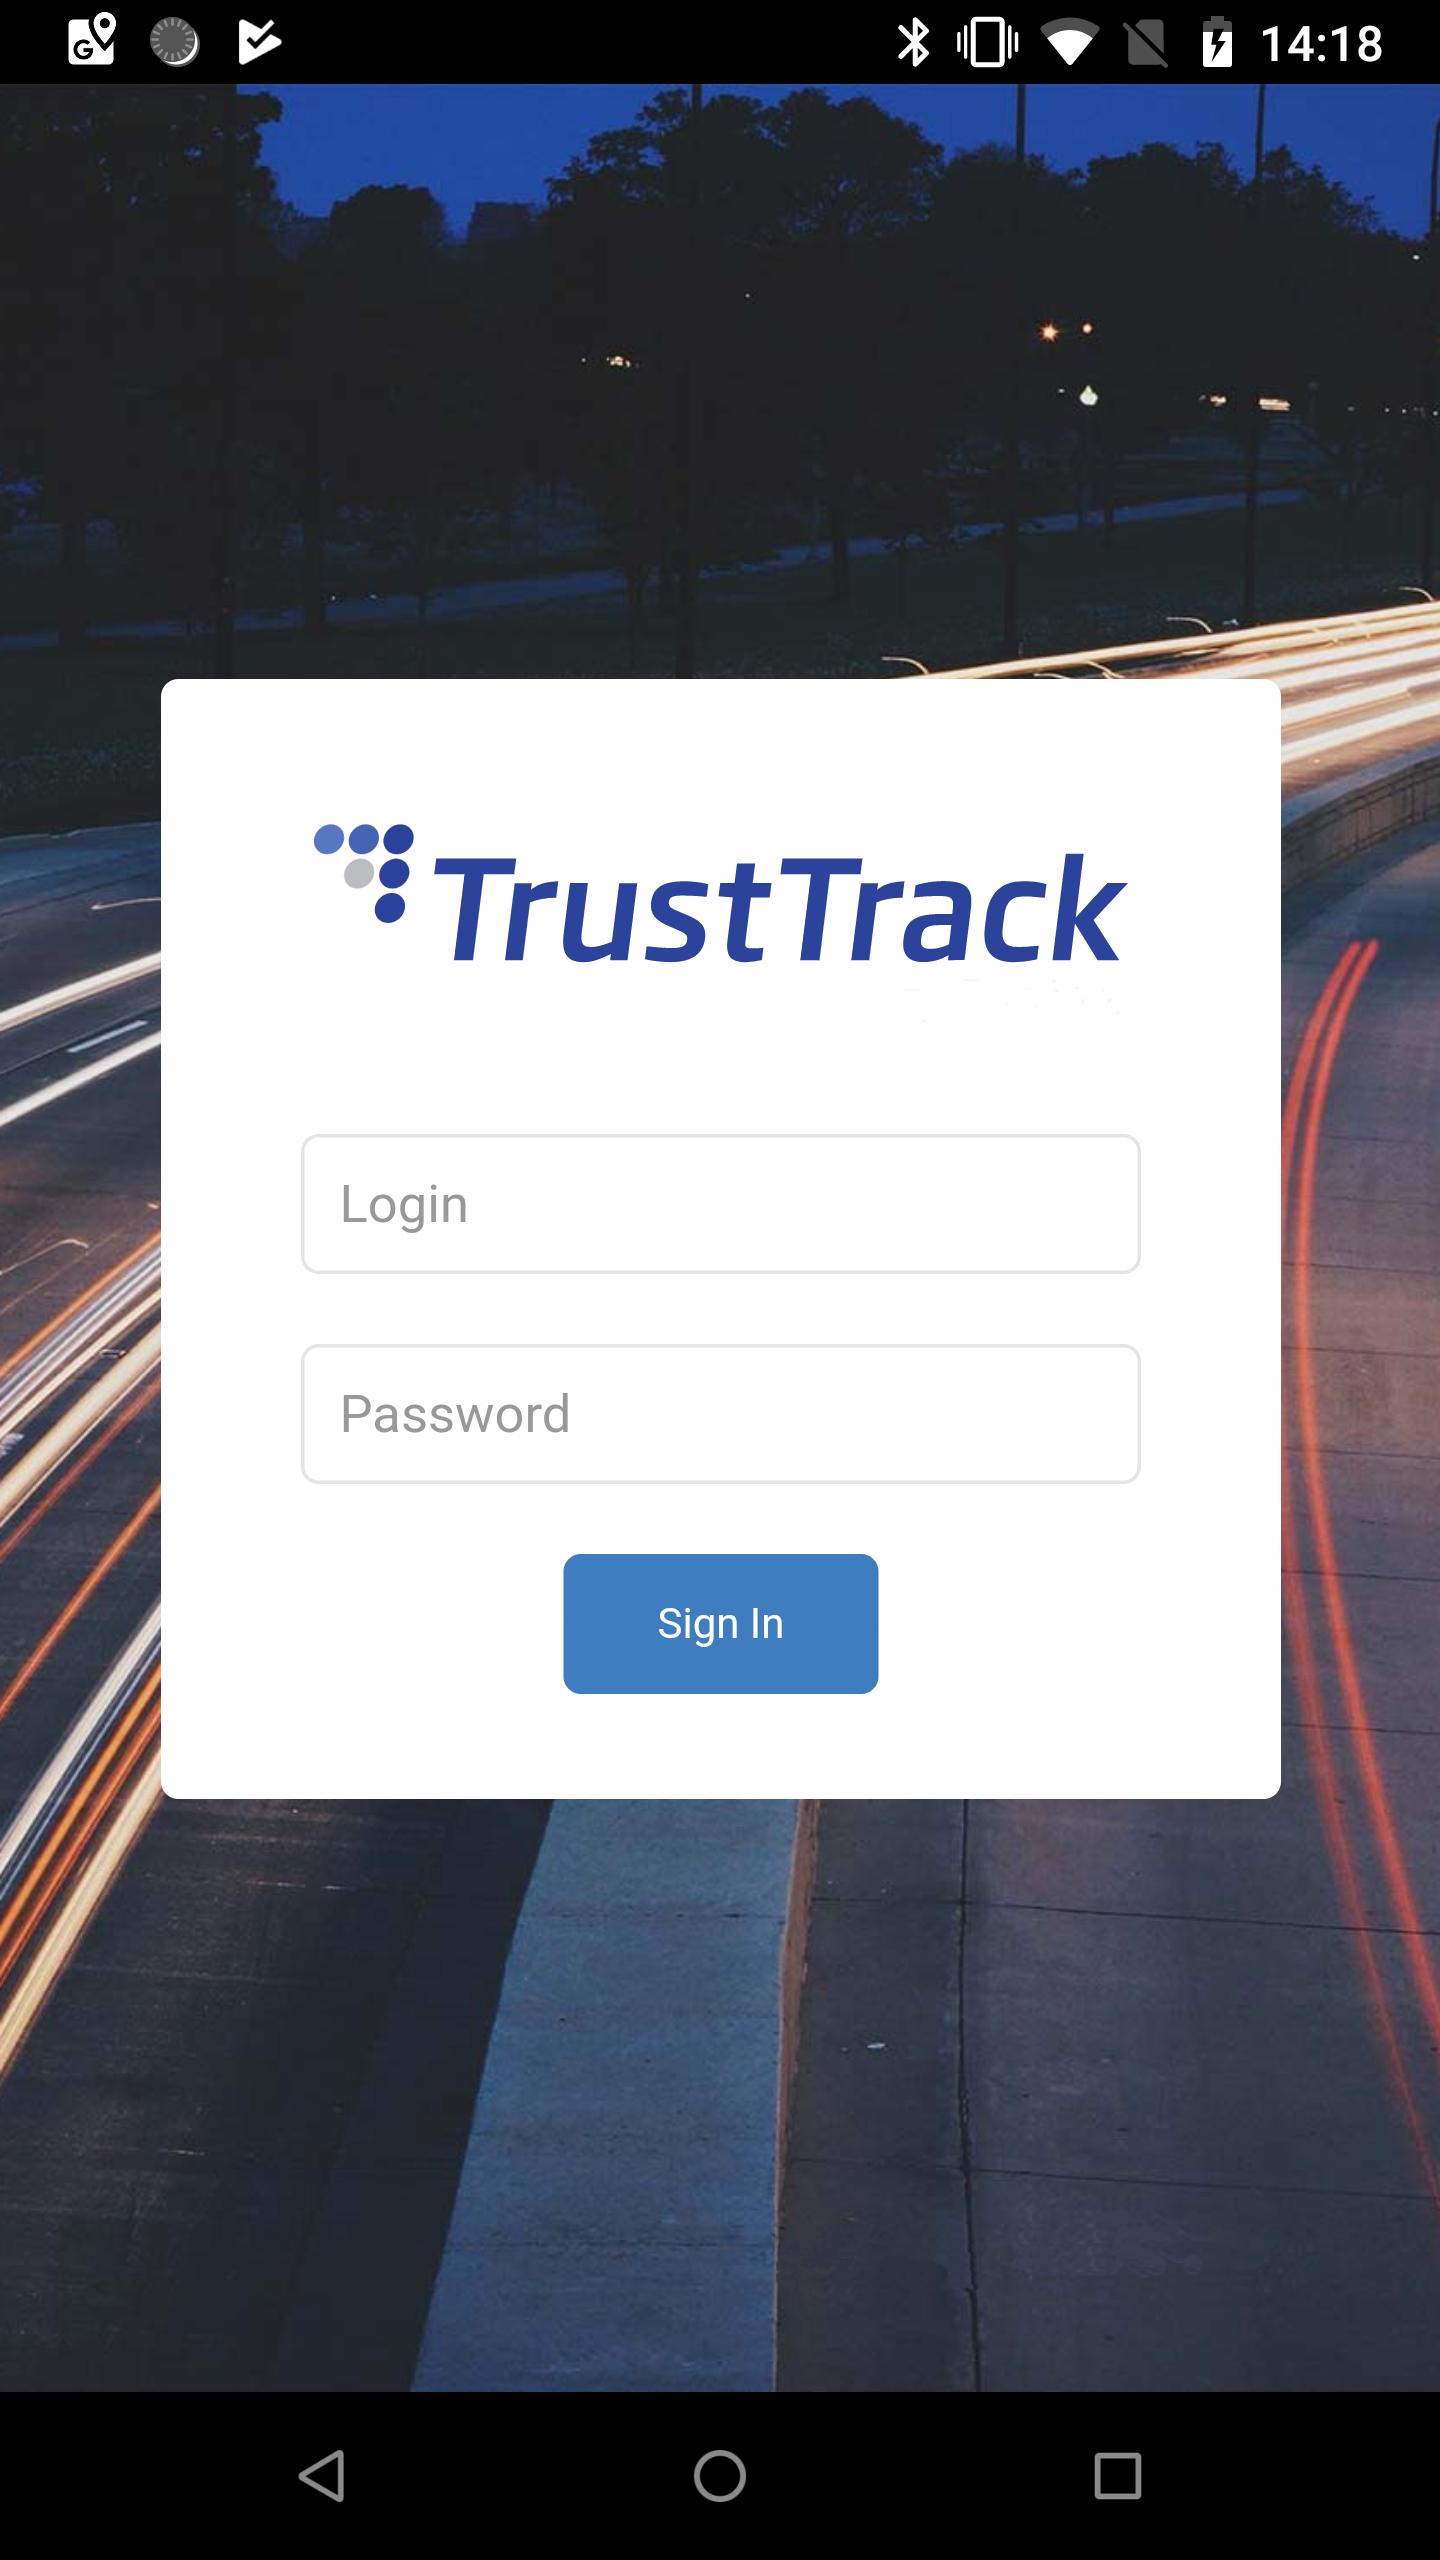 TrustTrack for Android - APK Download